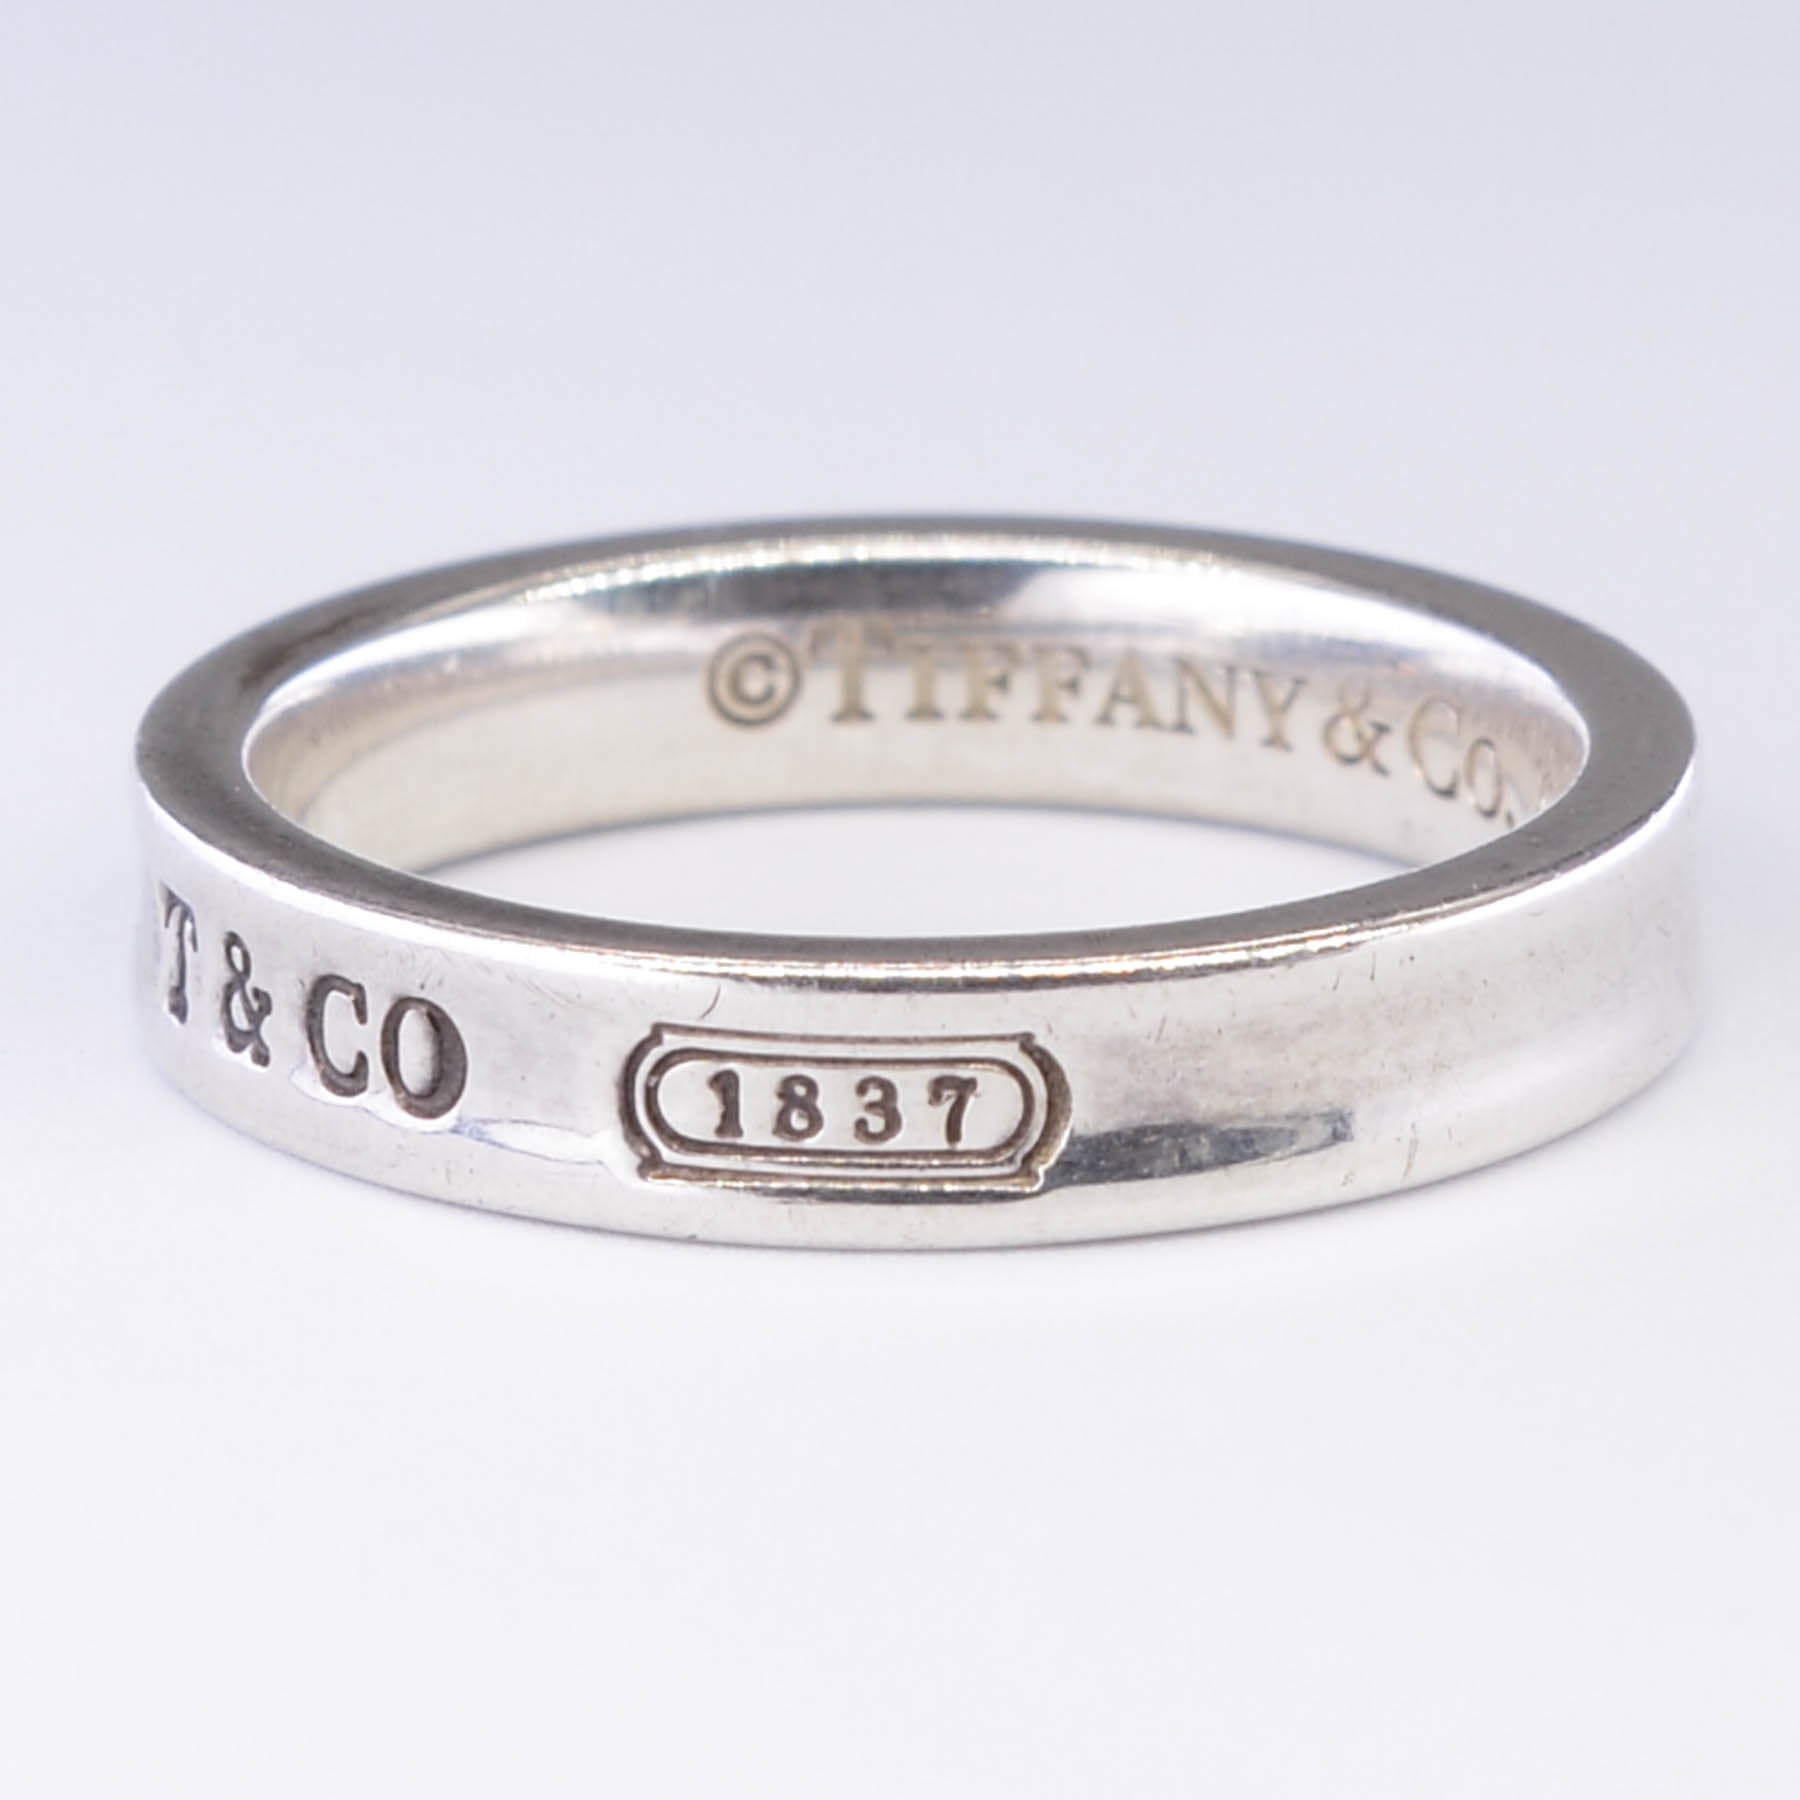 'Tiffany & Co.' 1837 Collection Sterling Silver Ring | SZ 7.5 - 100 Ways